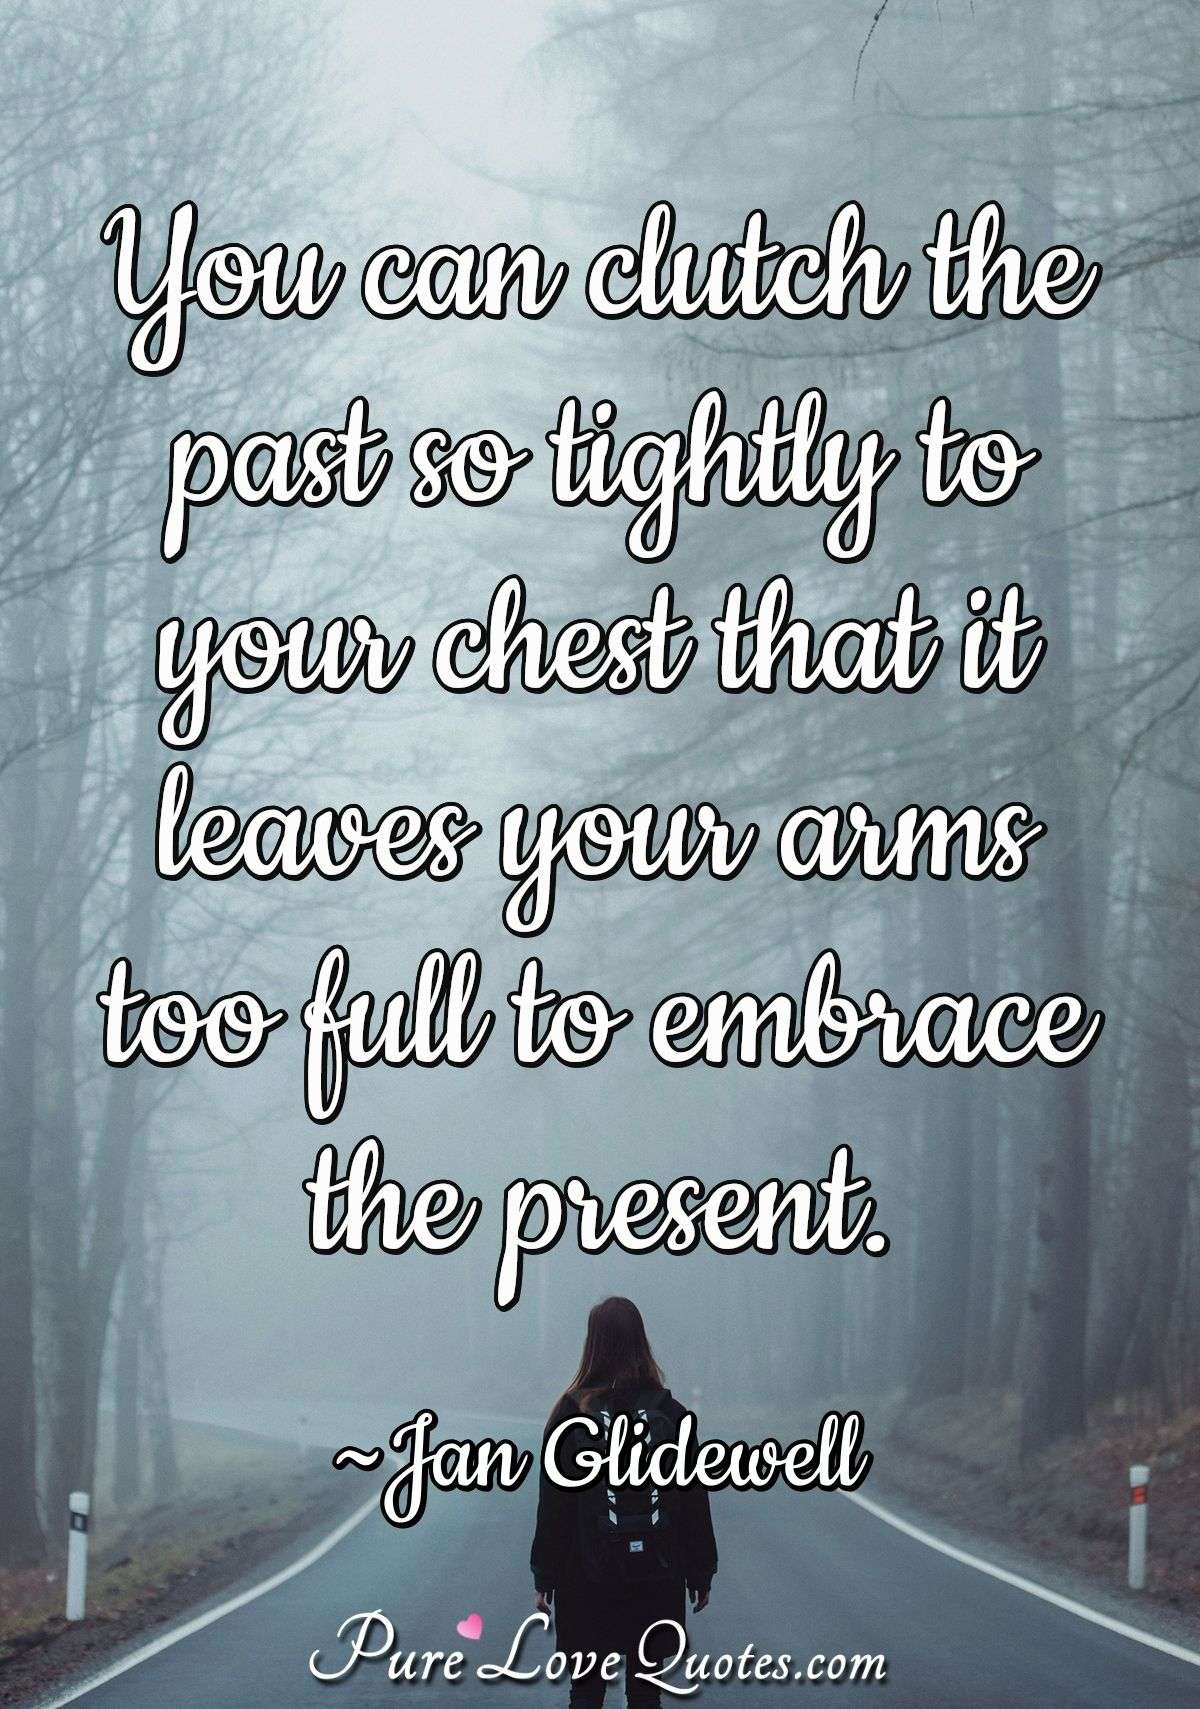 You can clutch the past so tightly to your chest that it leaves your arms too full to embrace the present. - Jan Glidewell